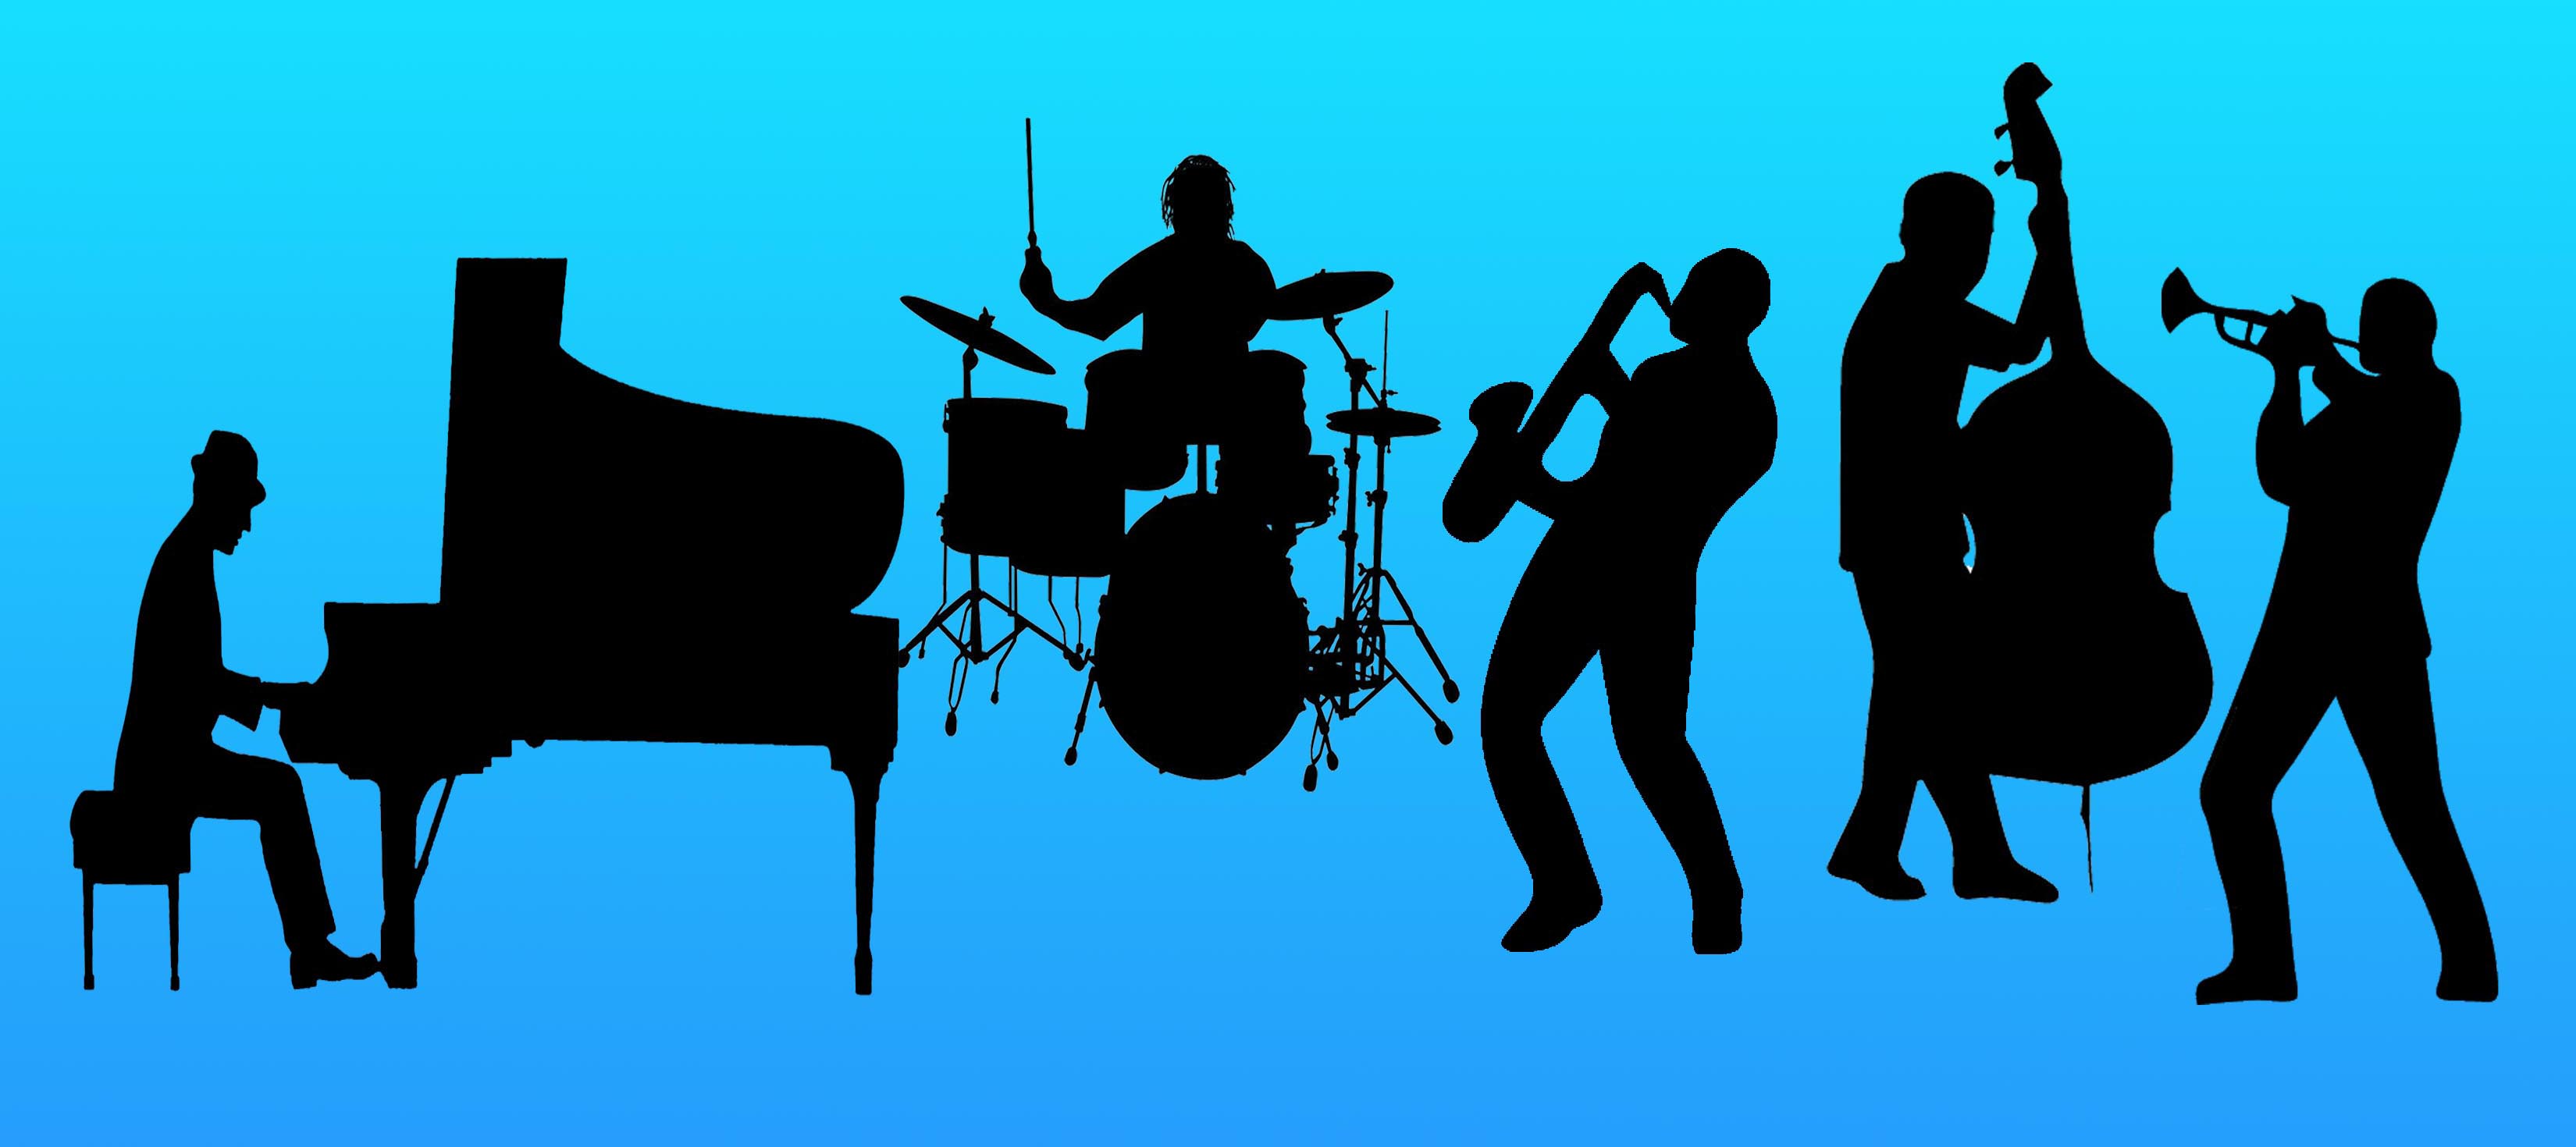 Band in Silouette